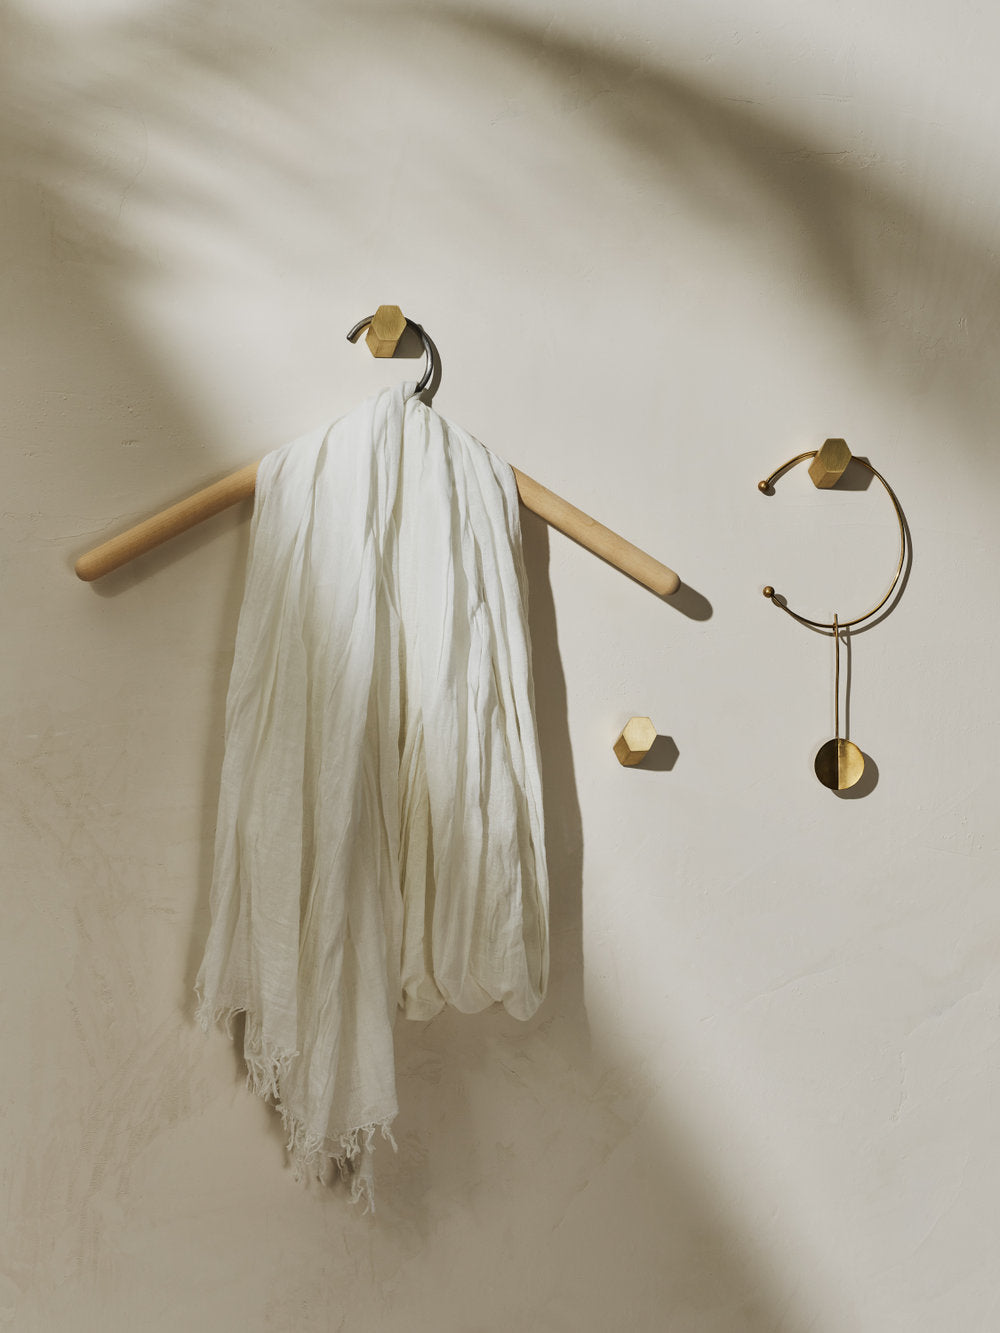 3 brass hexagonal wall hooks displaying clothes hanger and jewelry